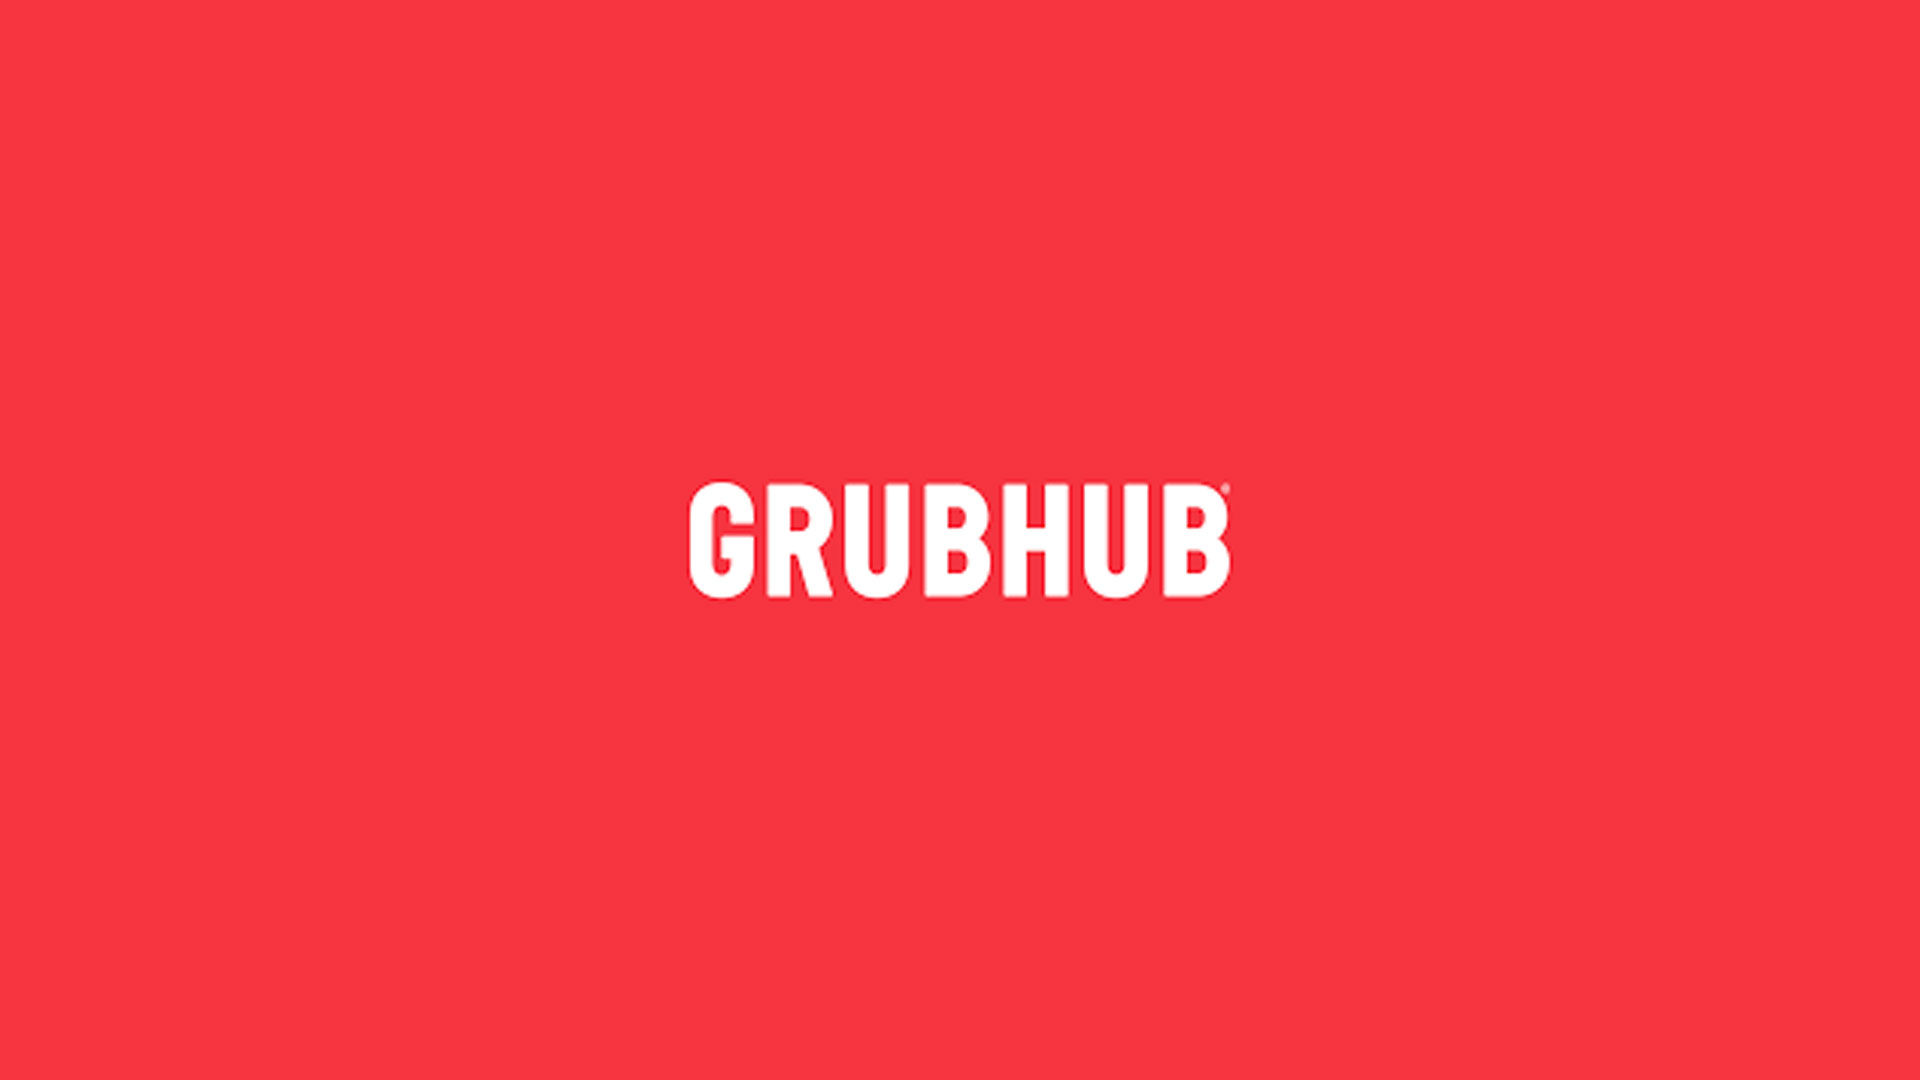 How to Get Grubhub+ For Free with Amazon Prime